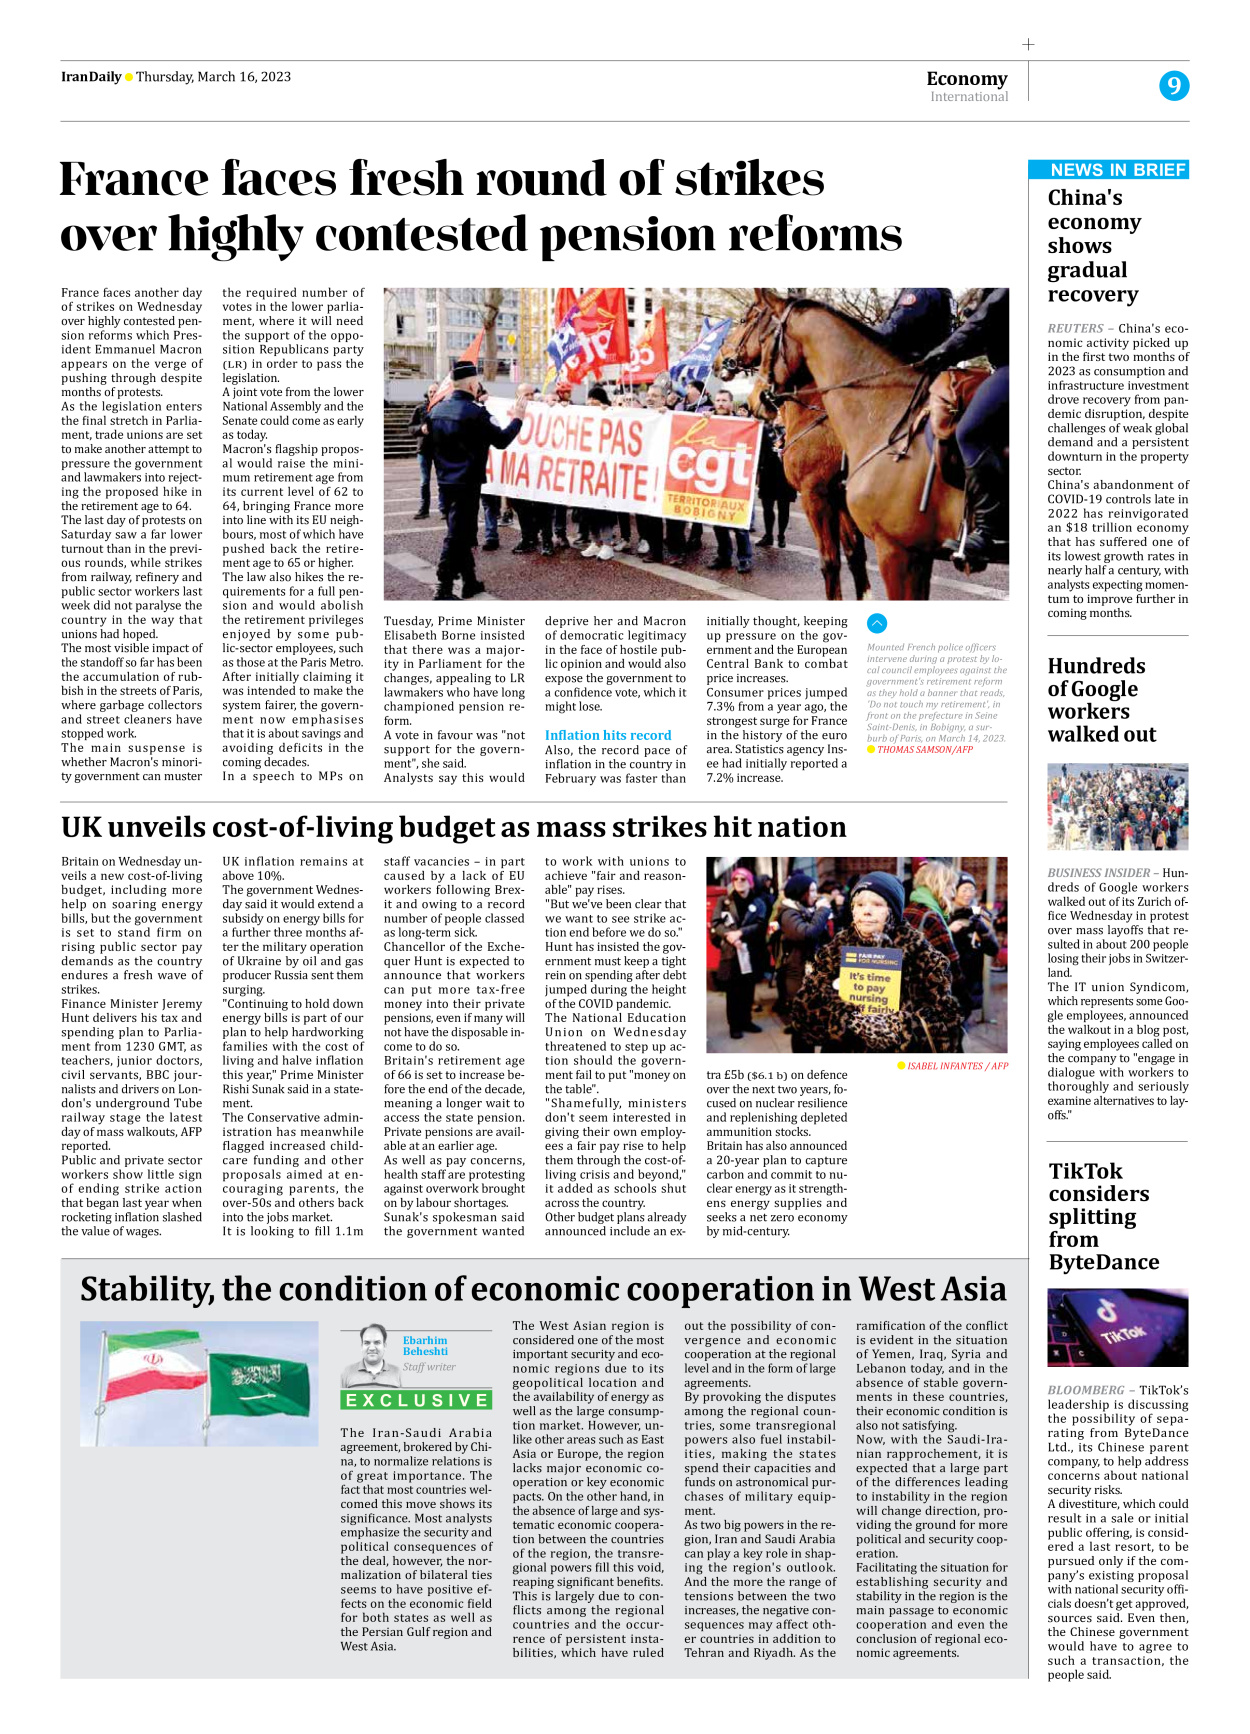 Iran Daily - Number Seven Thousand Two Hundred and Fifty Nine - 16 March 2023 - Page 9